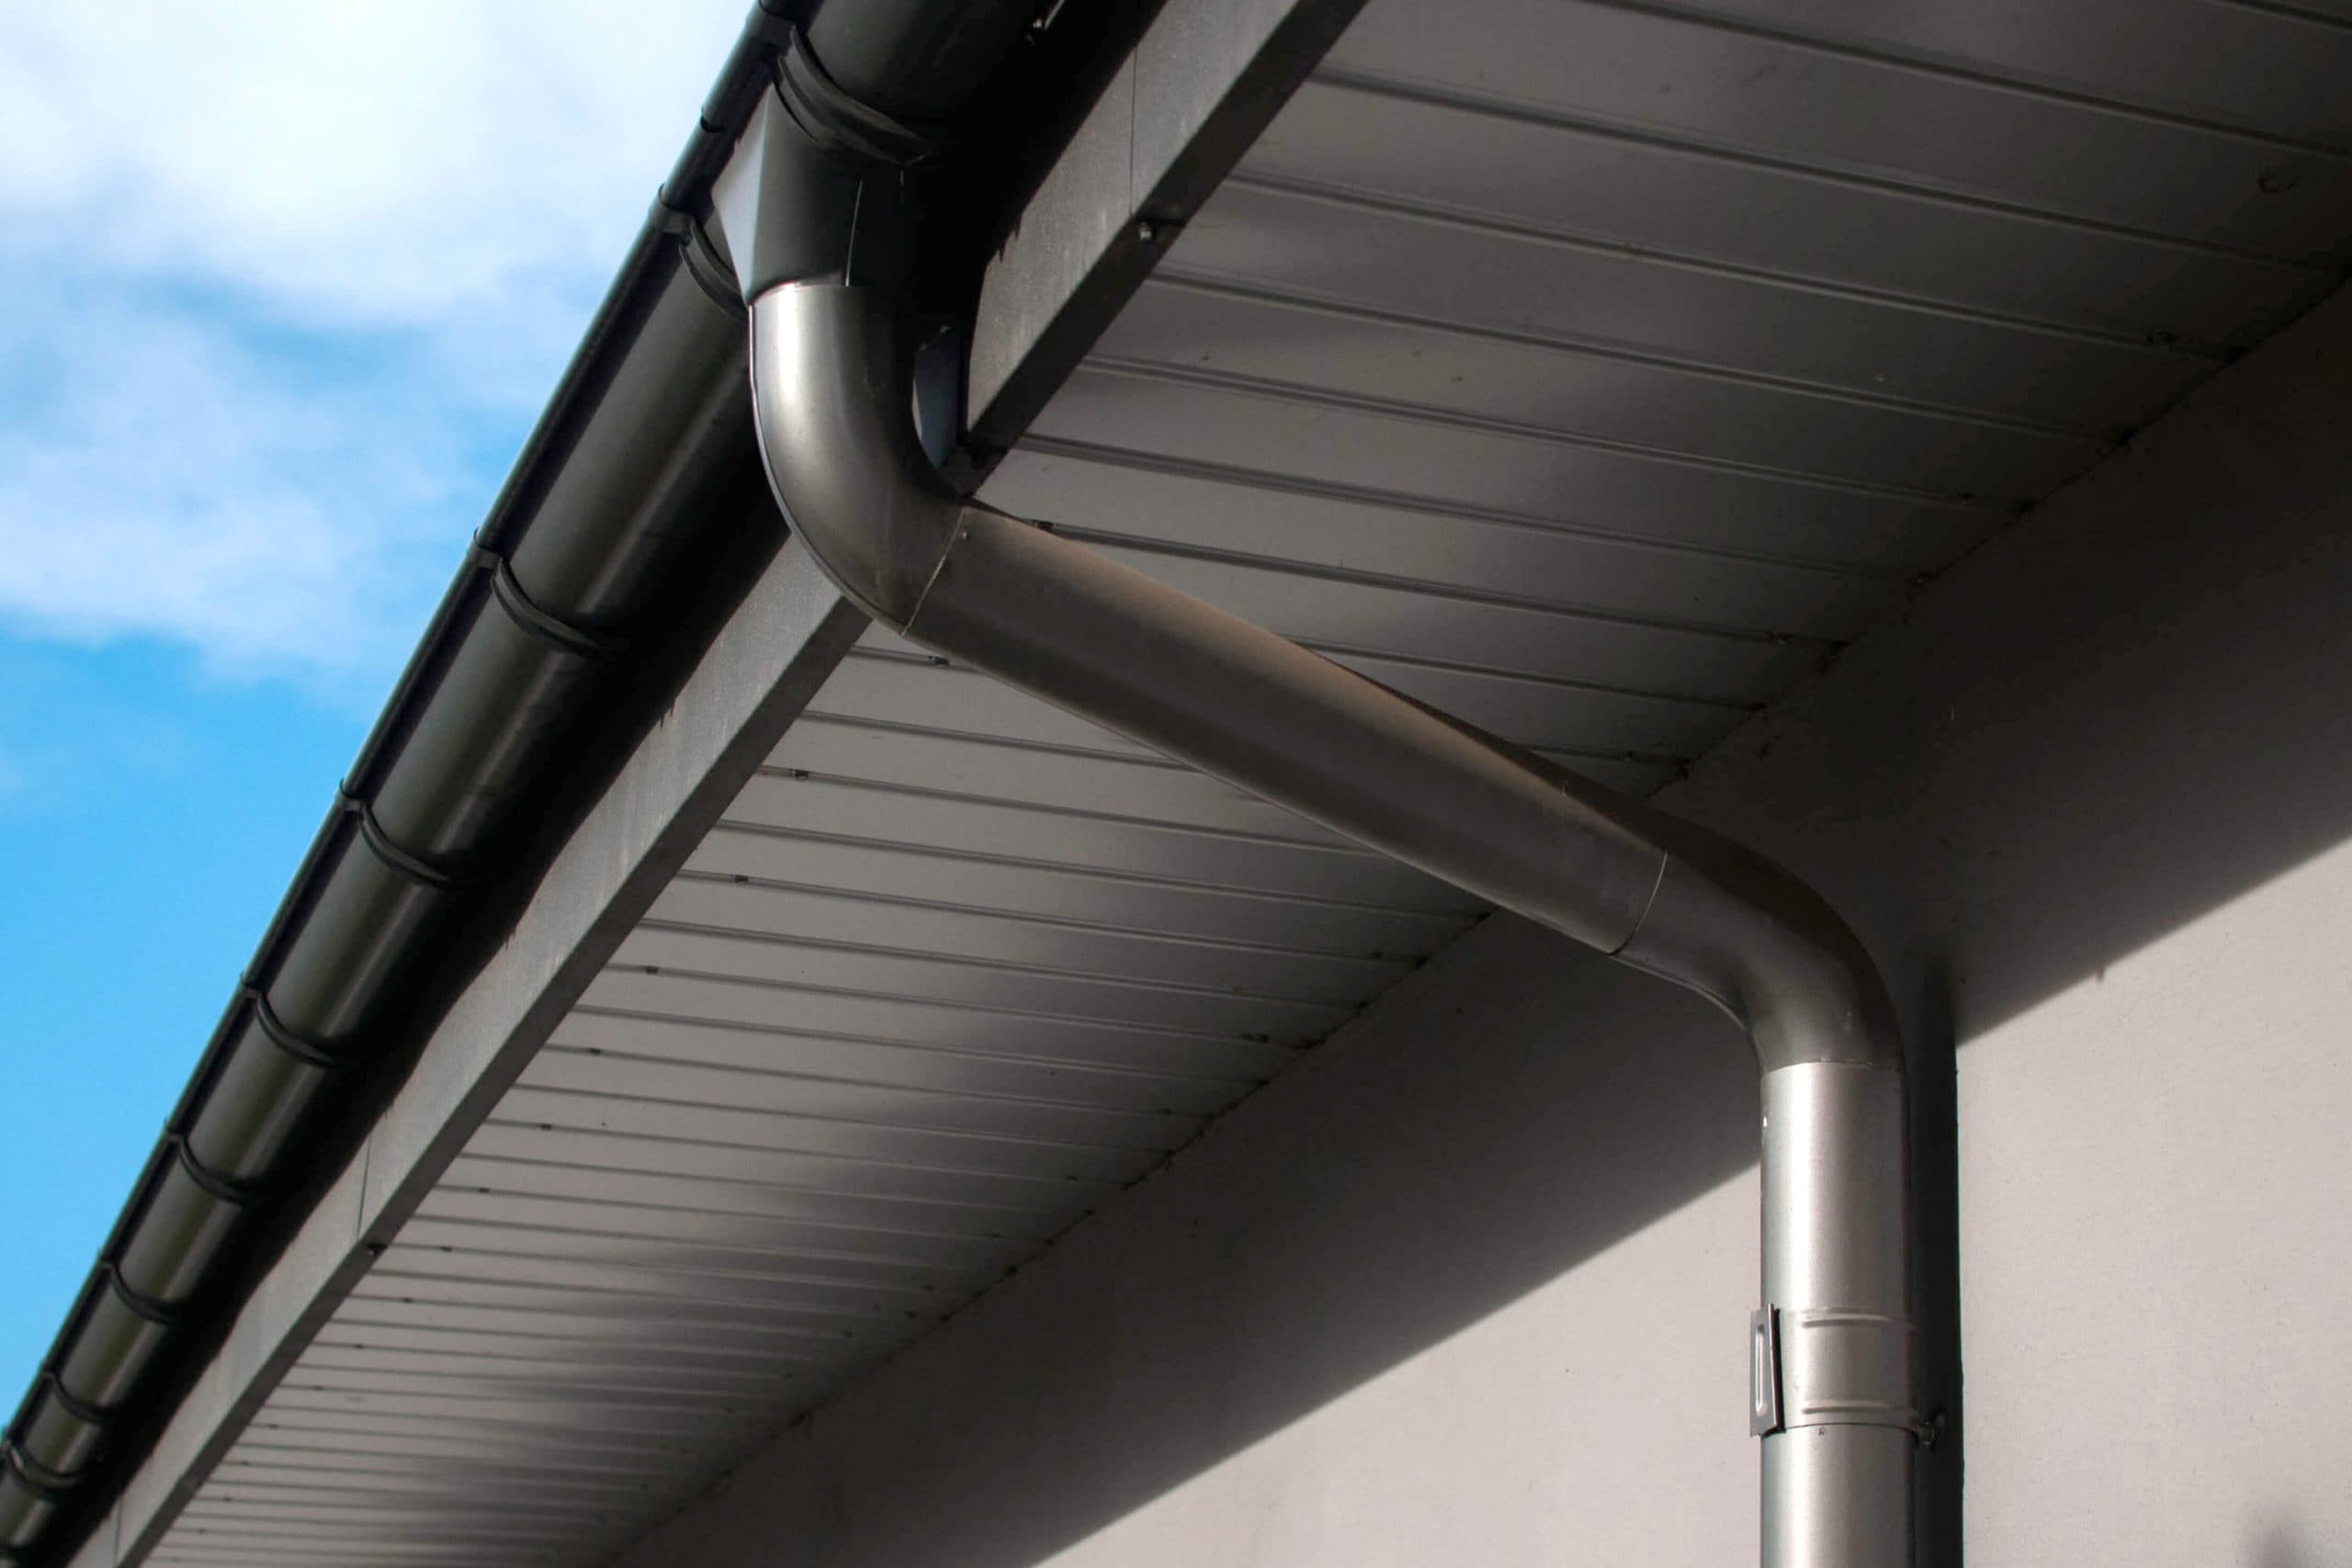 Reliable and affordable Galvanized gutters installation in Jacksonville